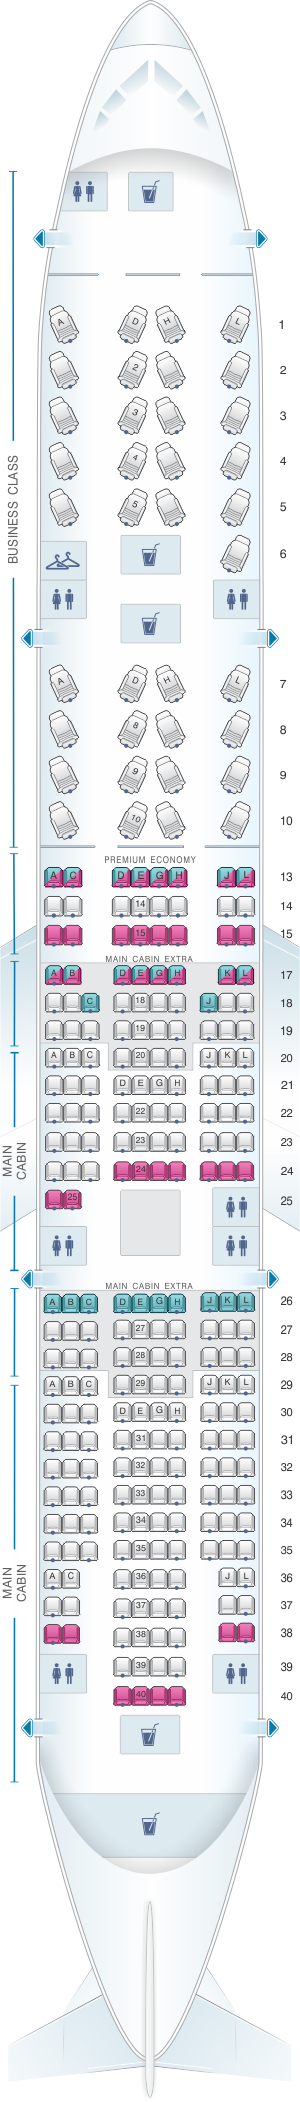 Seat map for American Airlines Boeing B777 200ER 273pax